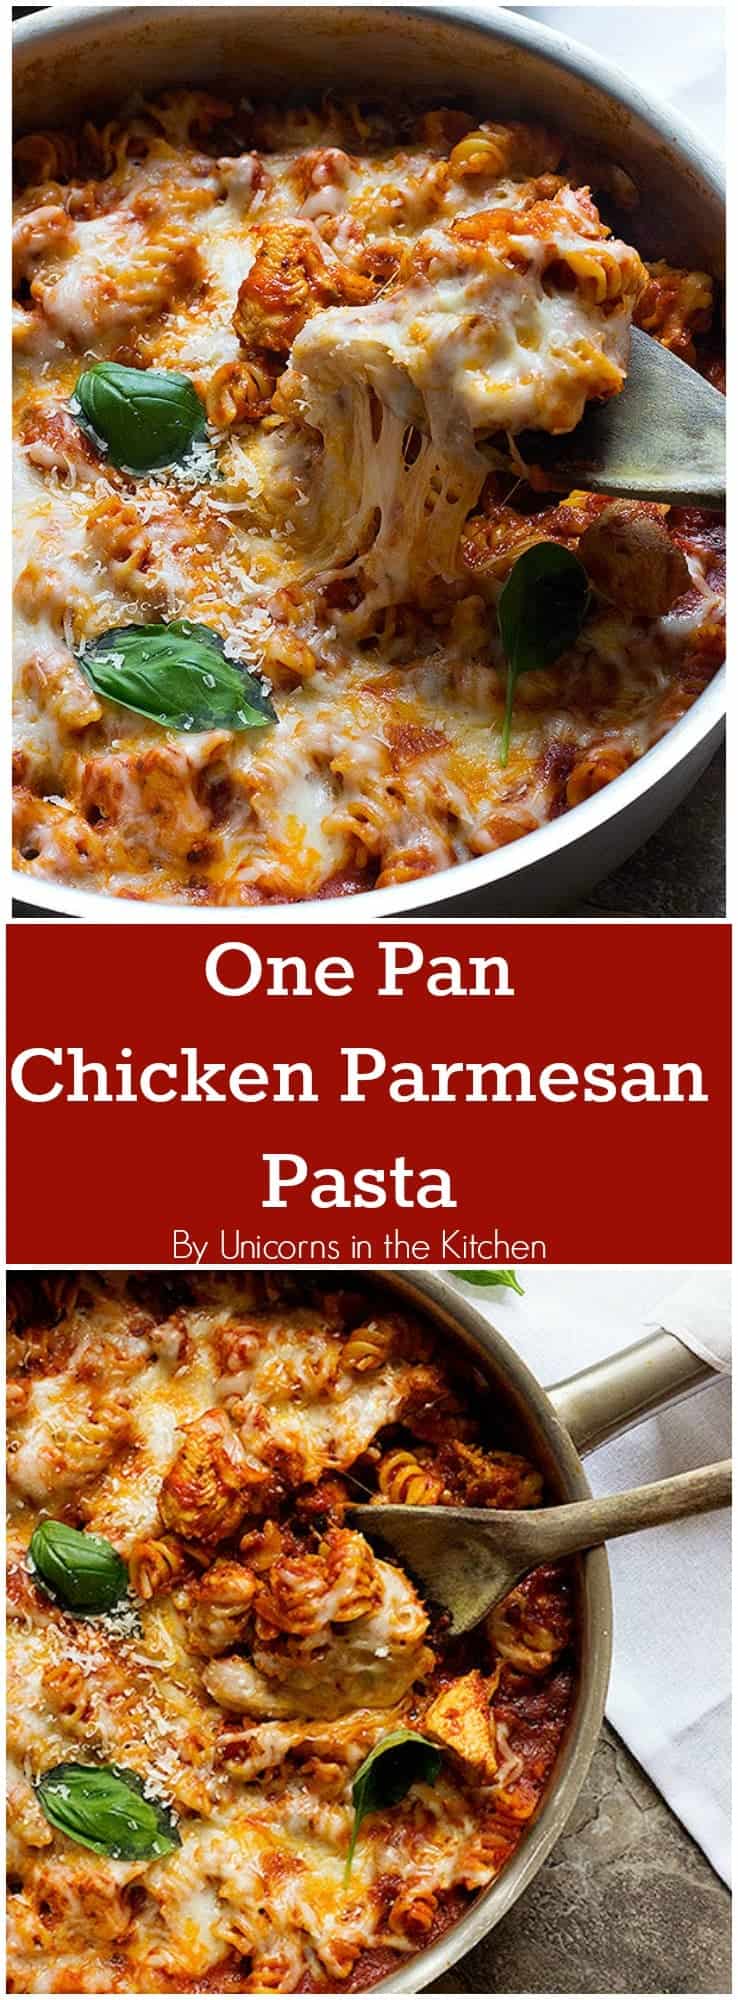 A healthier version of an all-time favorite, this One Pan Chicken Parmesan Pasta is great for weeknight dinners and is ready in less than 40 minutes!